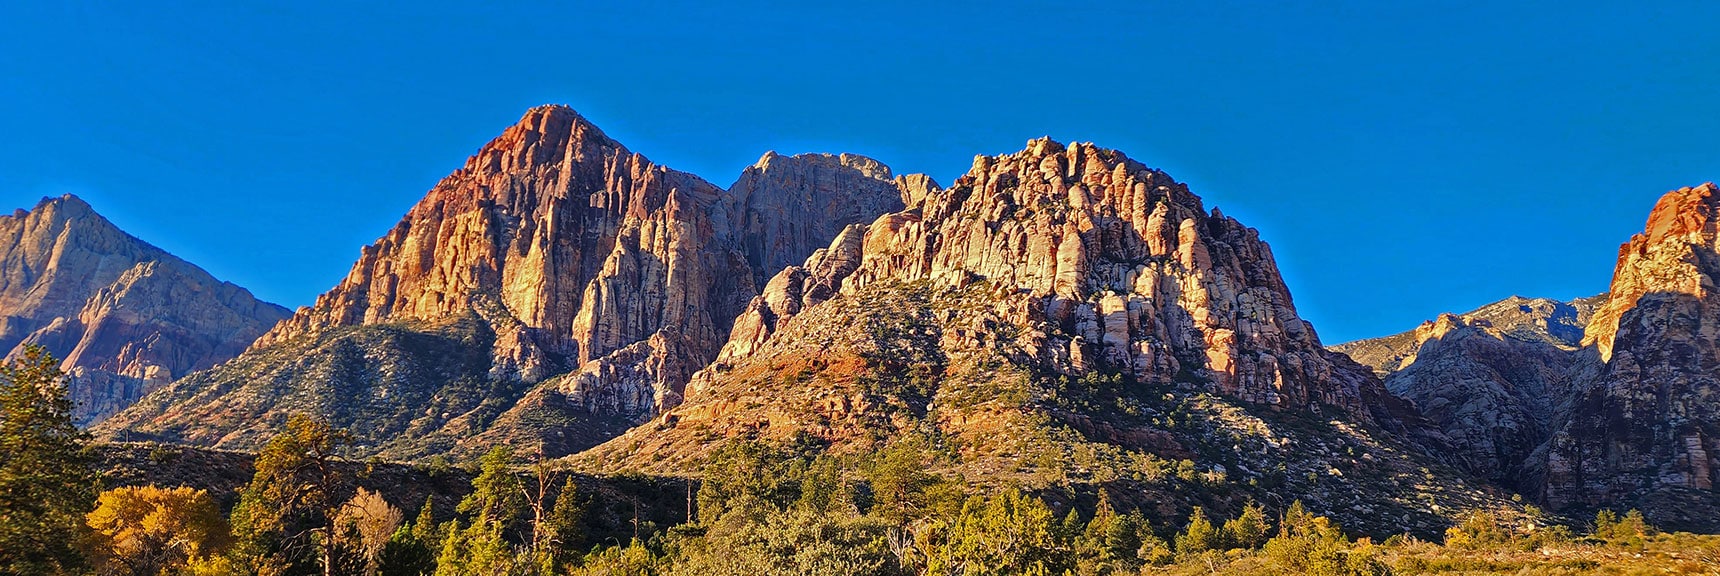 Closer View of Rainbow Mountain (Left) and Juniper Peak (Right) | Rock Climber Observations | Pine Creek Canyon | Rainbow Mountain Wilderness, Nevada